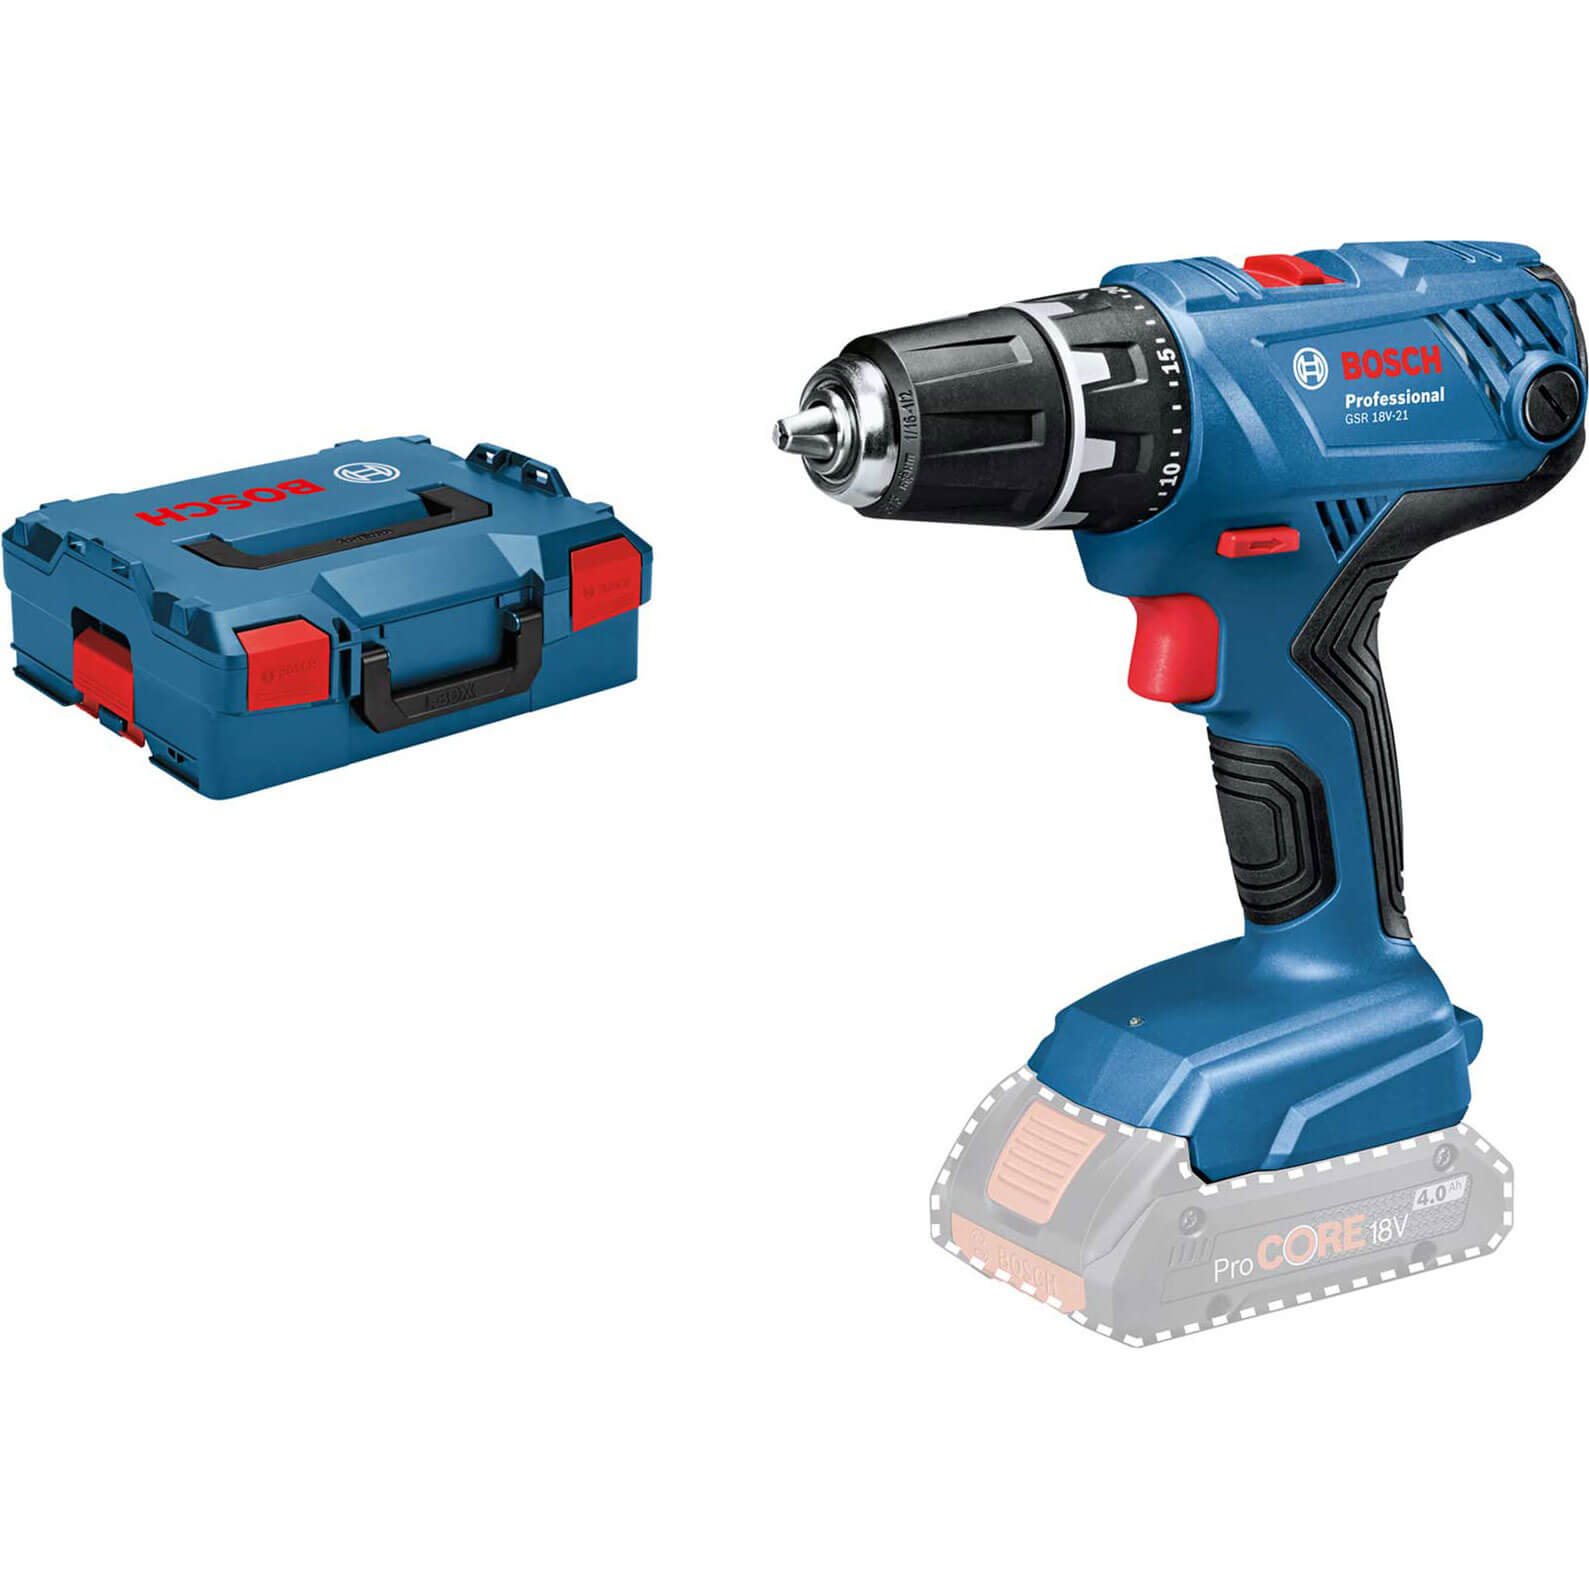 Bosch GSB 18V-21 18v Cordless Brushless Combi Drill No Batteries No Charger Case